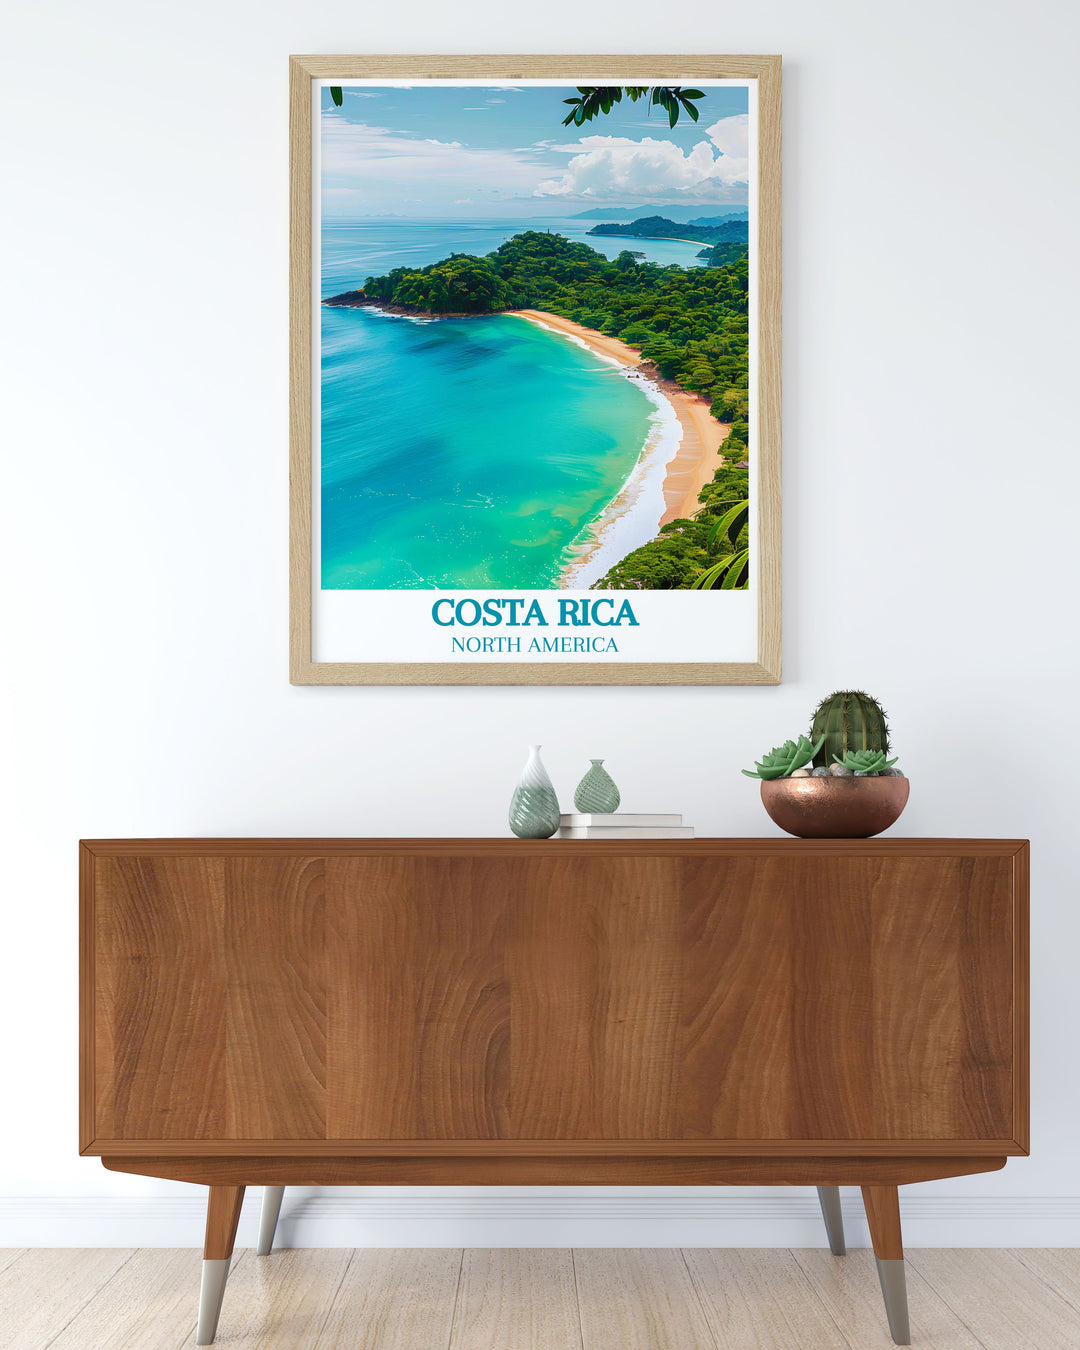 Capture the breathtaking scenery of Costa Rica with a travel print of Manuel Antonio National Park, featuring its white sand beaches and lush jungles, perfect for enhancing any room with the beauty of nature.